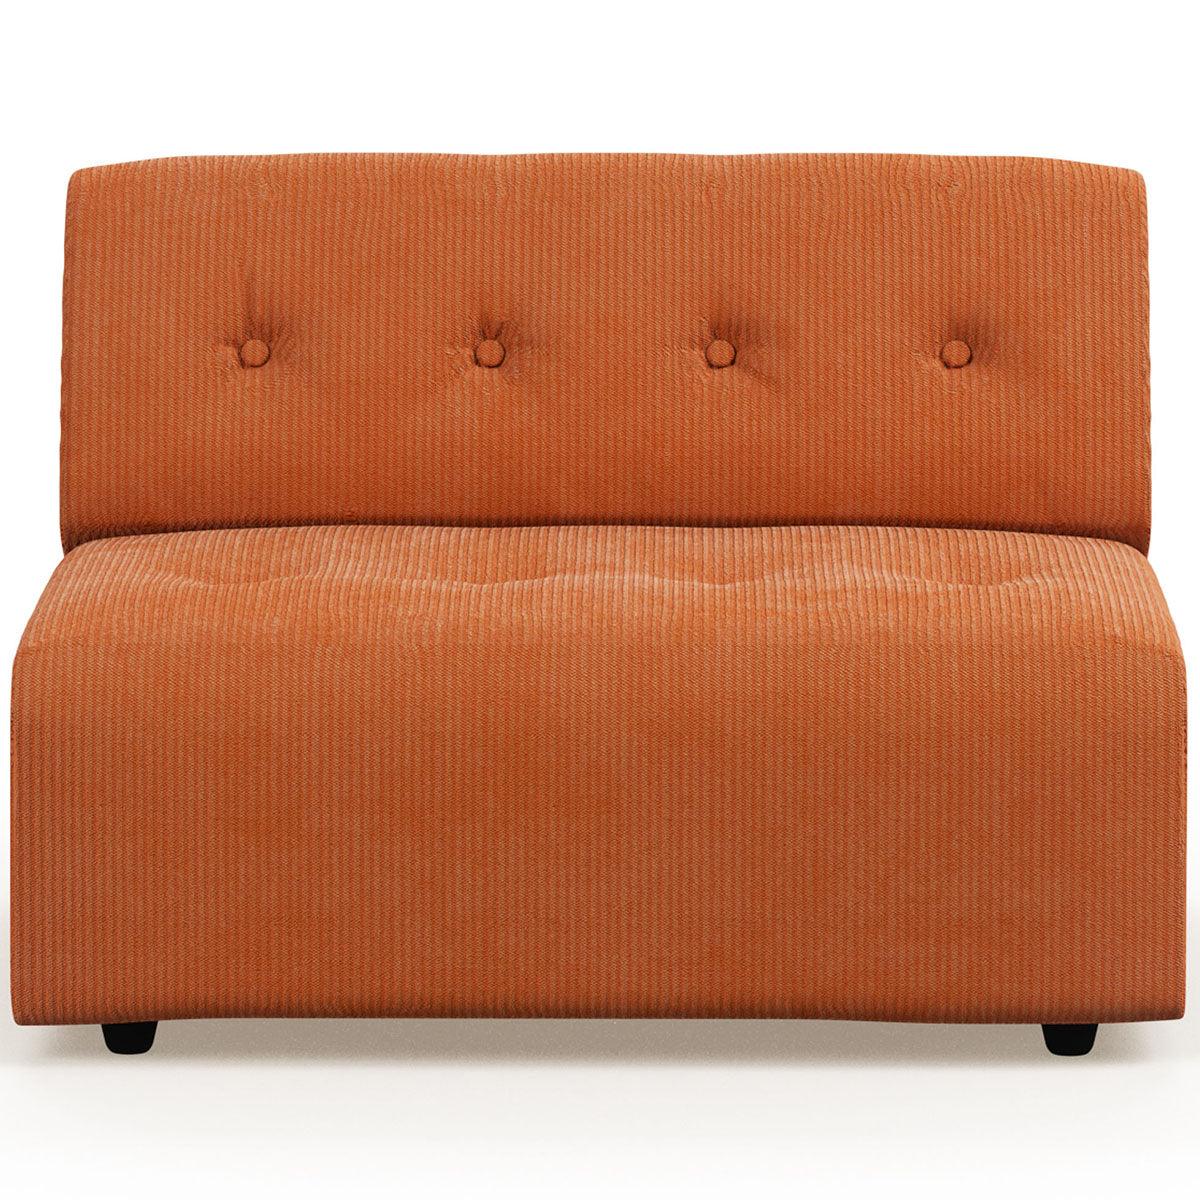 Vint Corduroy Rib Couch - Element Middle 1.5-Seat - WOO .Design